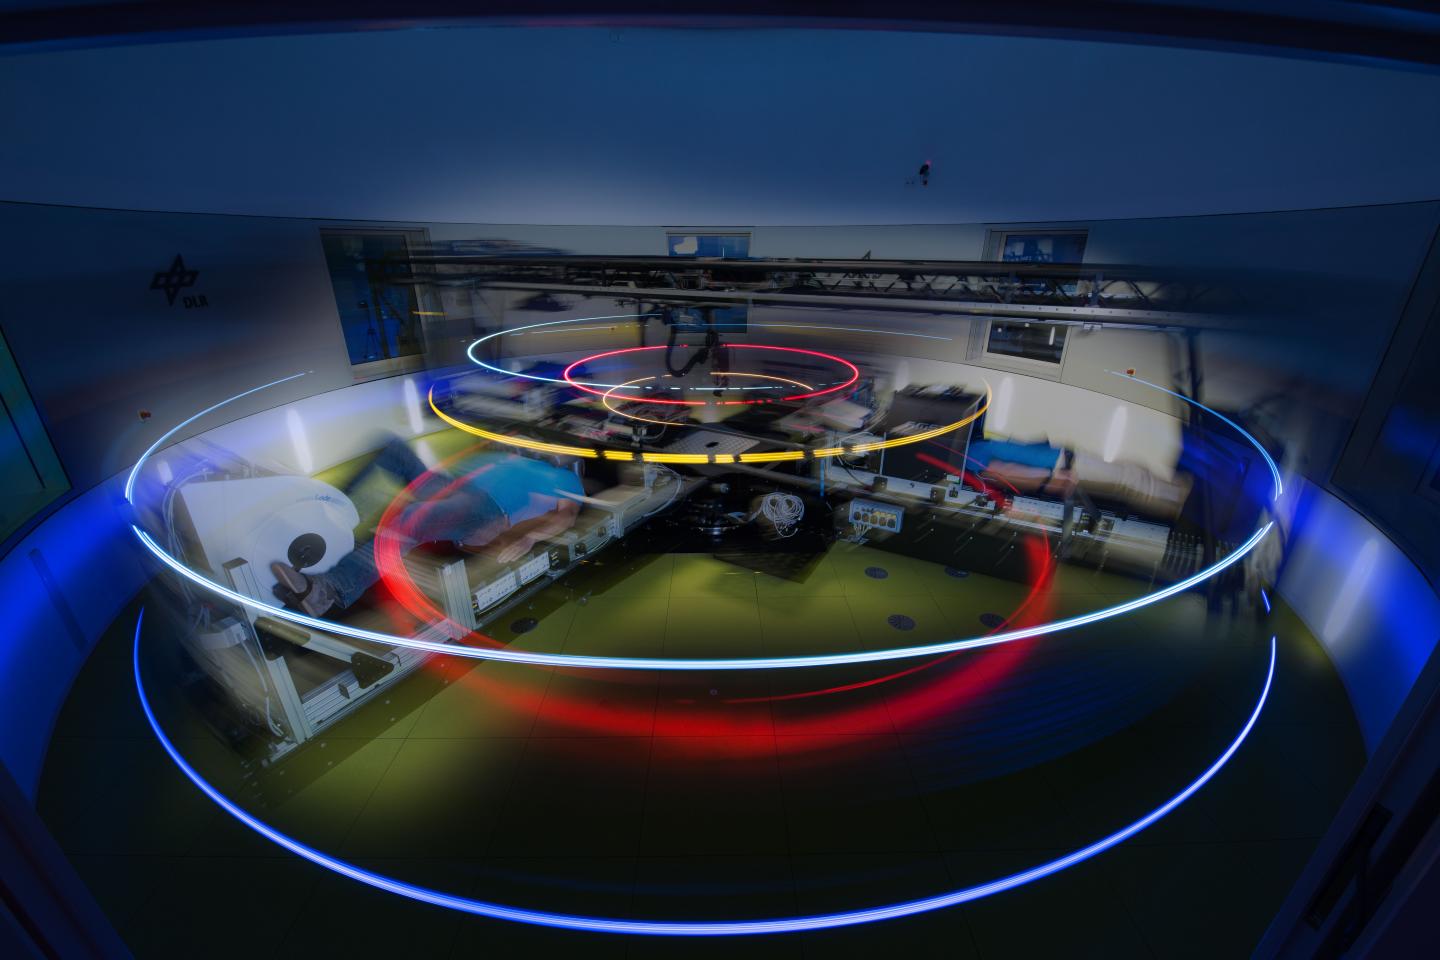 Long-exposure photo of the centrifuge used to simulate microgravity in the research subjects